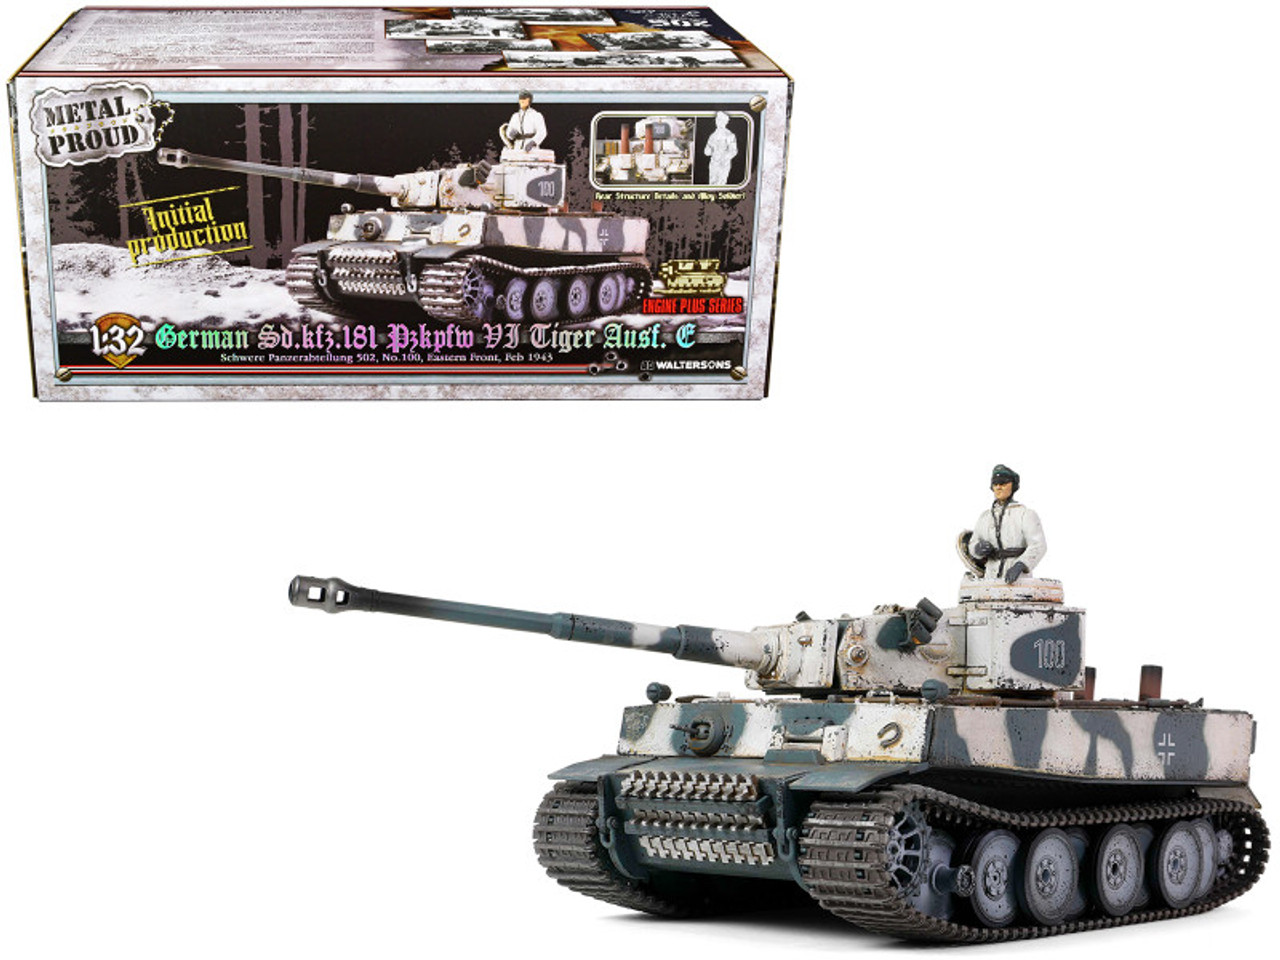 German Sd.Kfz.181 PzKpfw VI Tiger Ausf. E Heavy Tank "Schwere Panzerabteilung 502 No.100 Eastern Front" (February 1943) "Engine Plus" Series 1/32 Diecast Model by Metal Proud